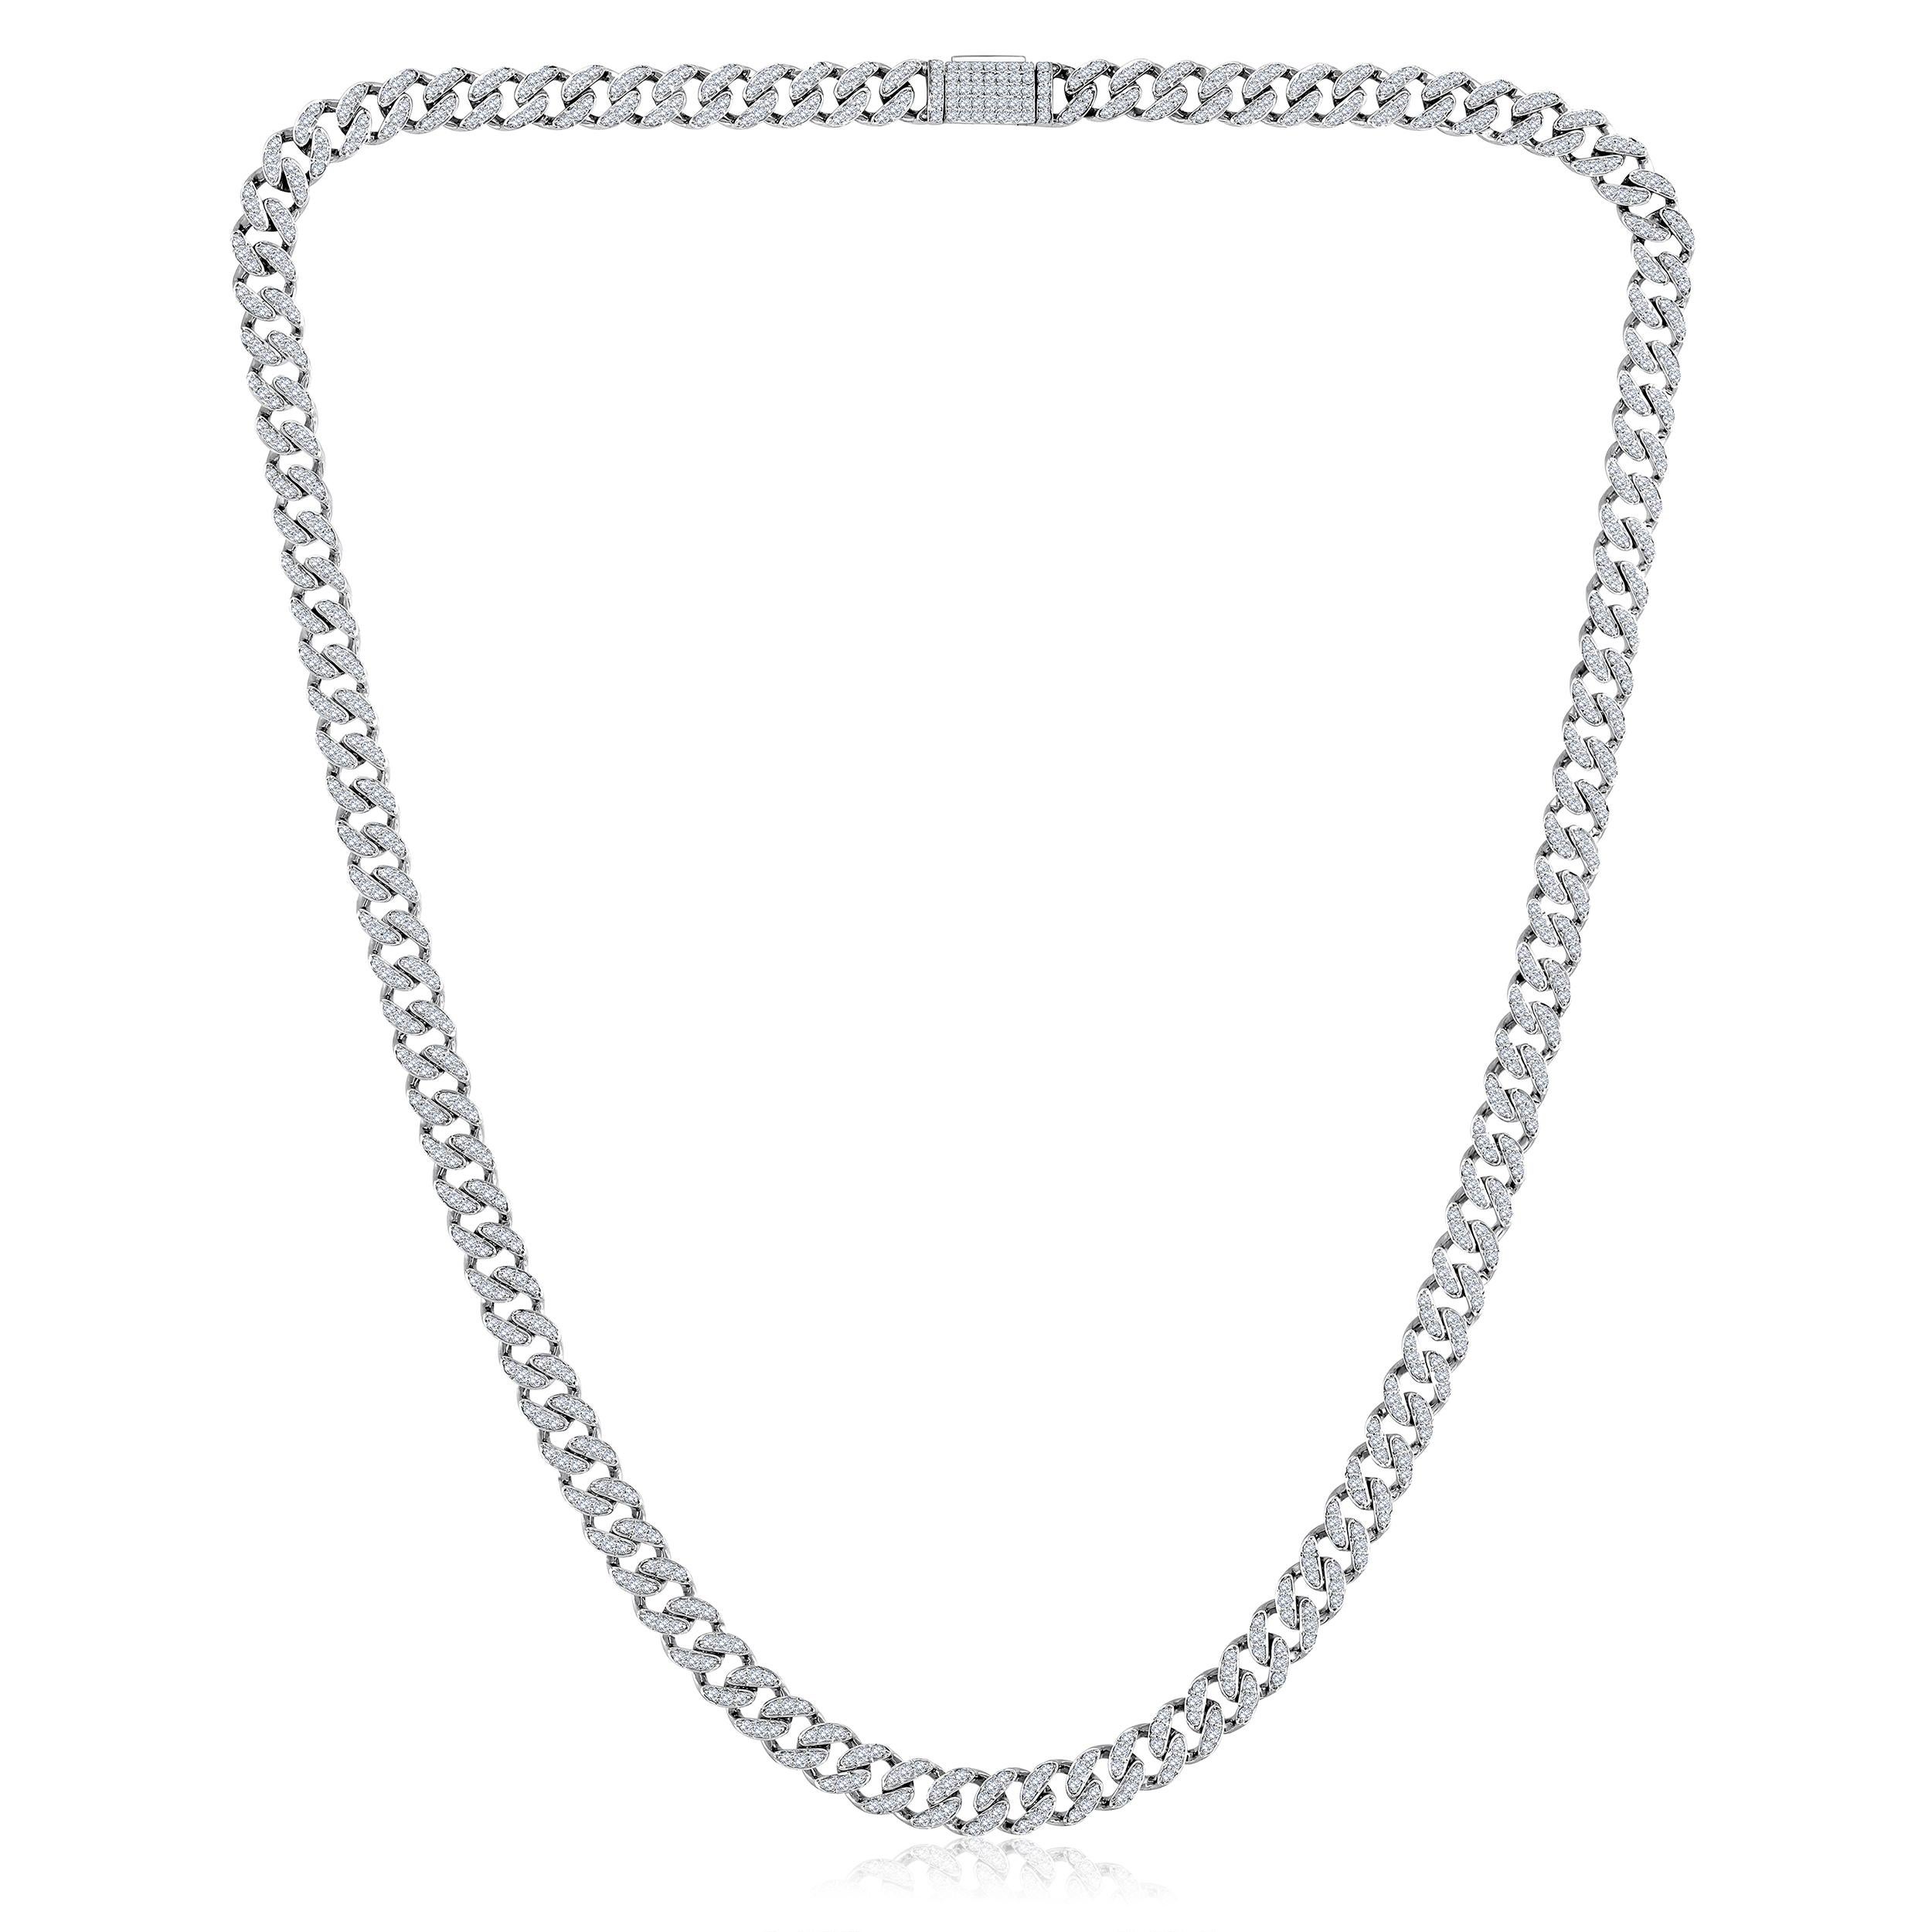 Crafted in 16.25 grams of 10K White Gold, the necklace contains 705 stones of Round Diamonds with a total of 2.92 carat in F-G color and I1-I2 carat. The necklace length is 16 inches.

CONTEMPORARY AND TIMELESS ESSENCE: Crafted in 14-karat/18-karat